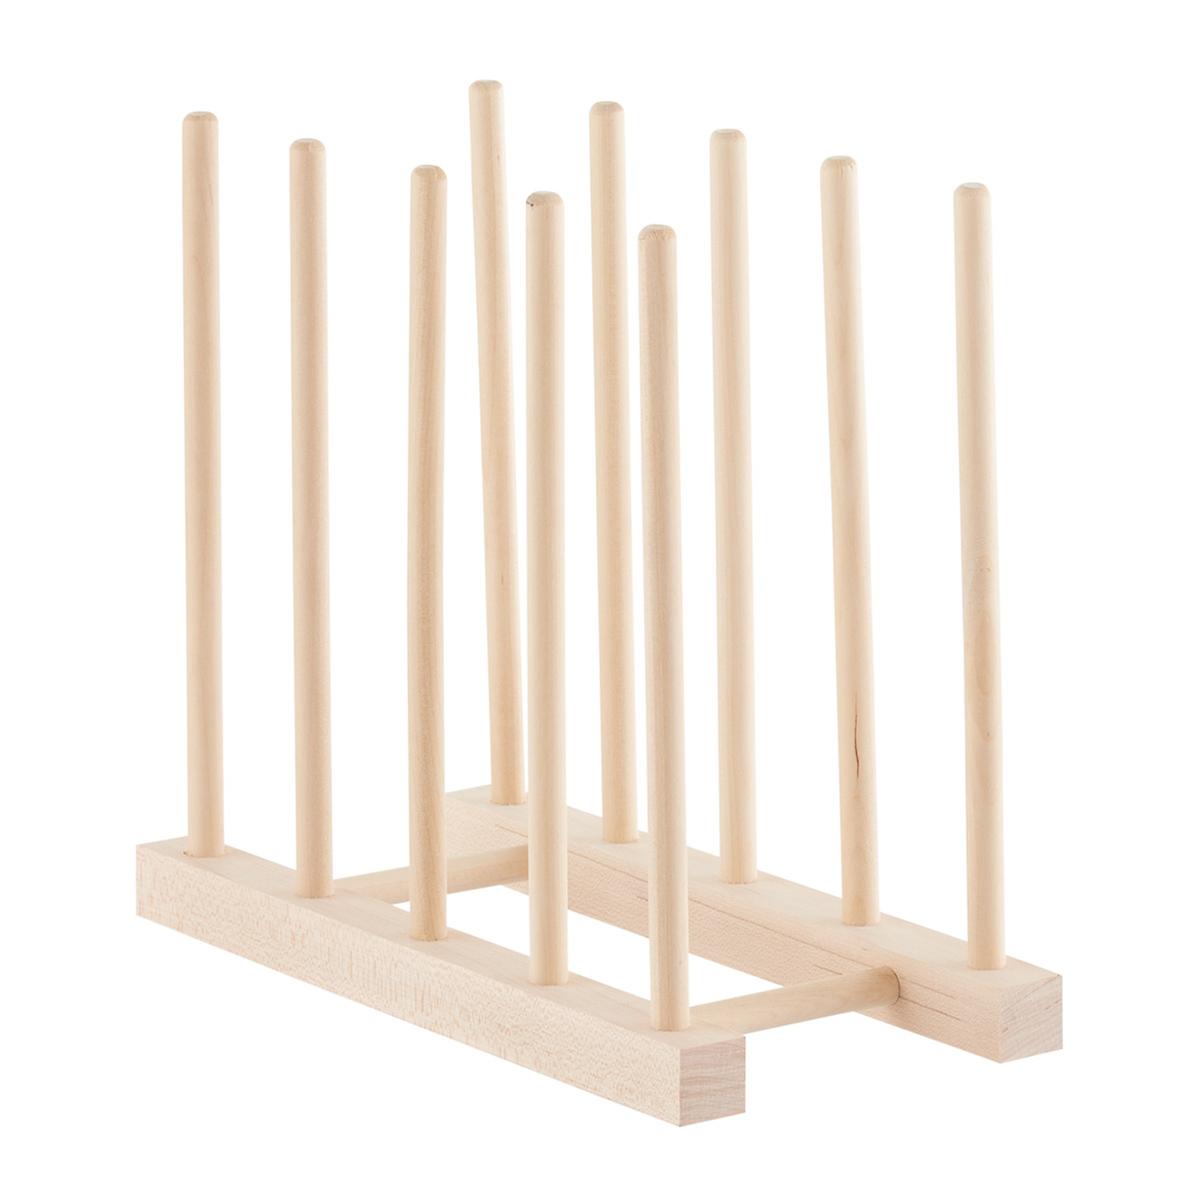 Maple Racks | The Container Store